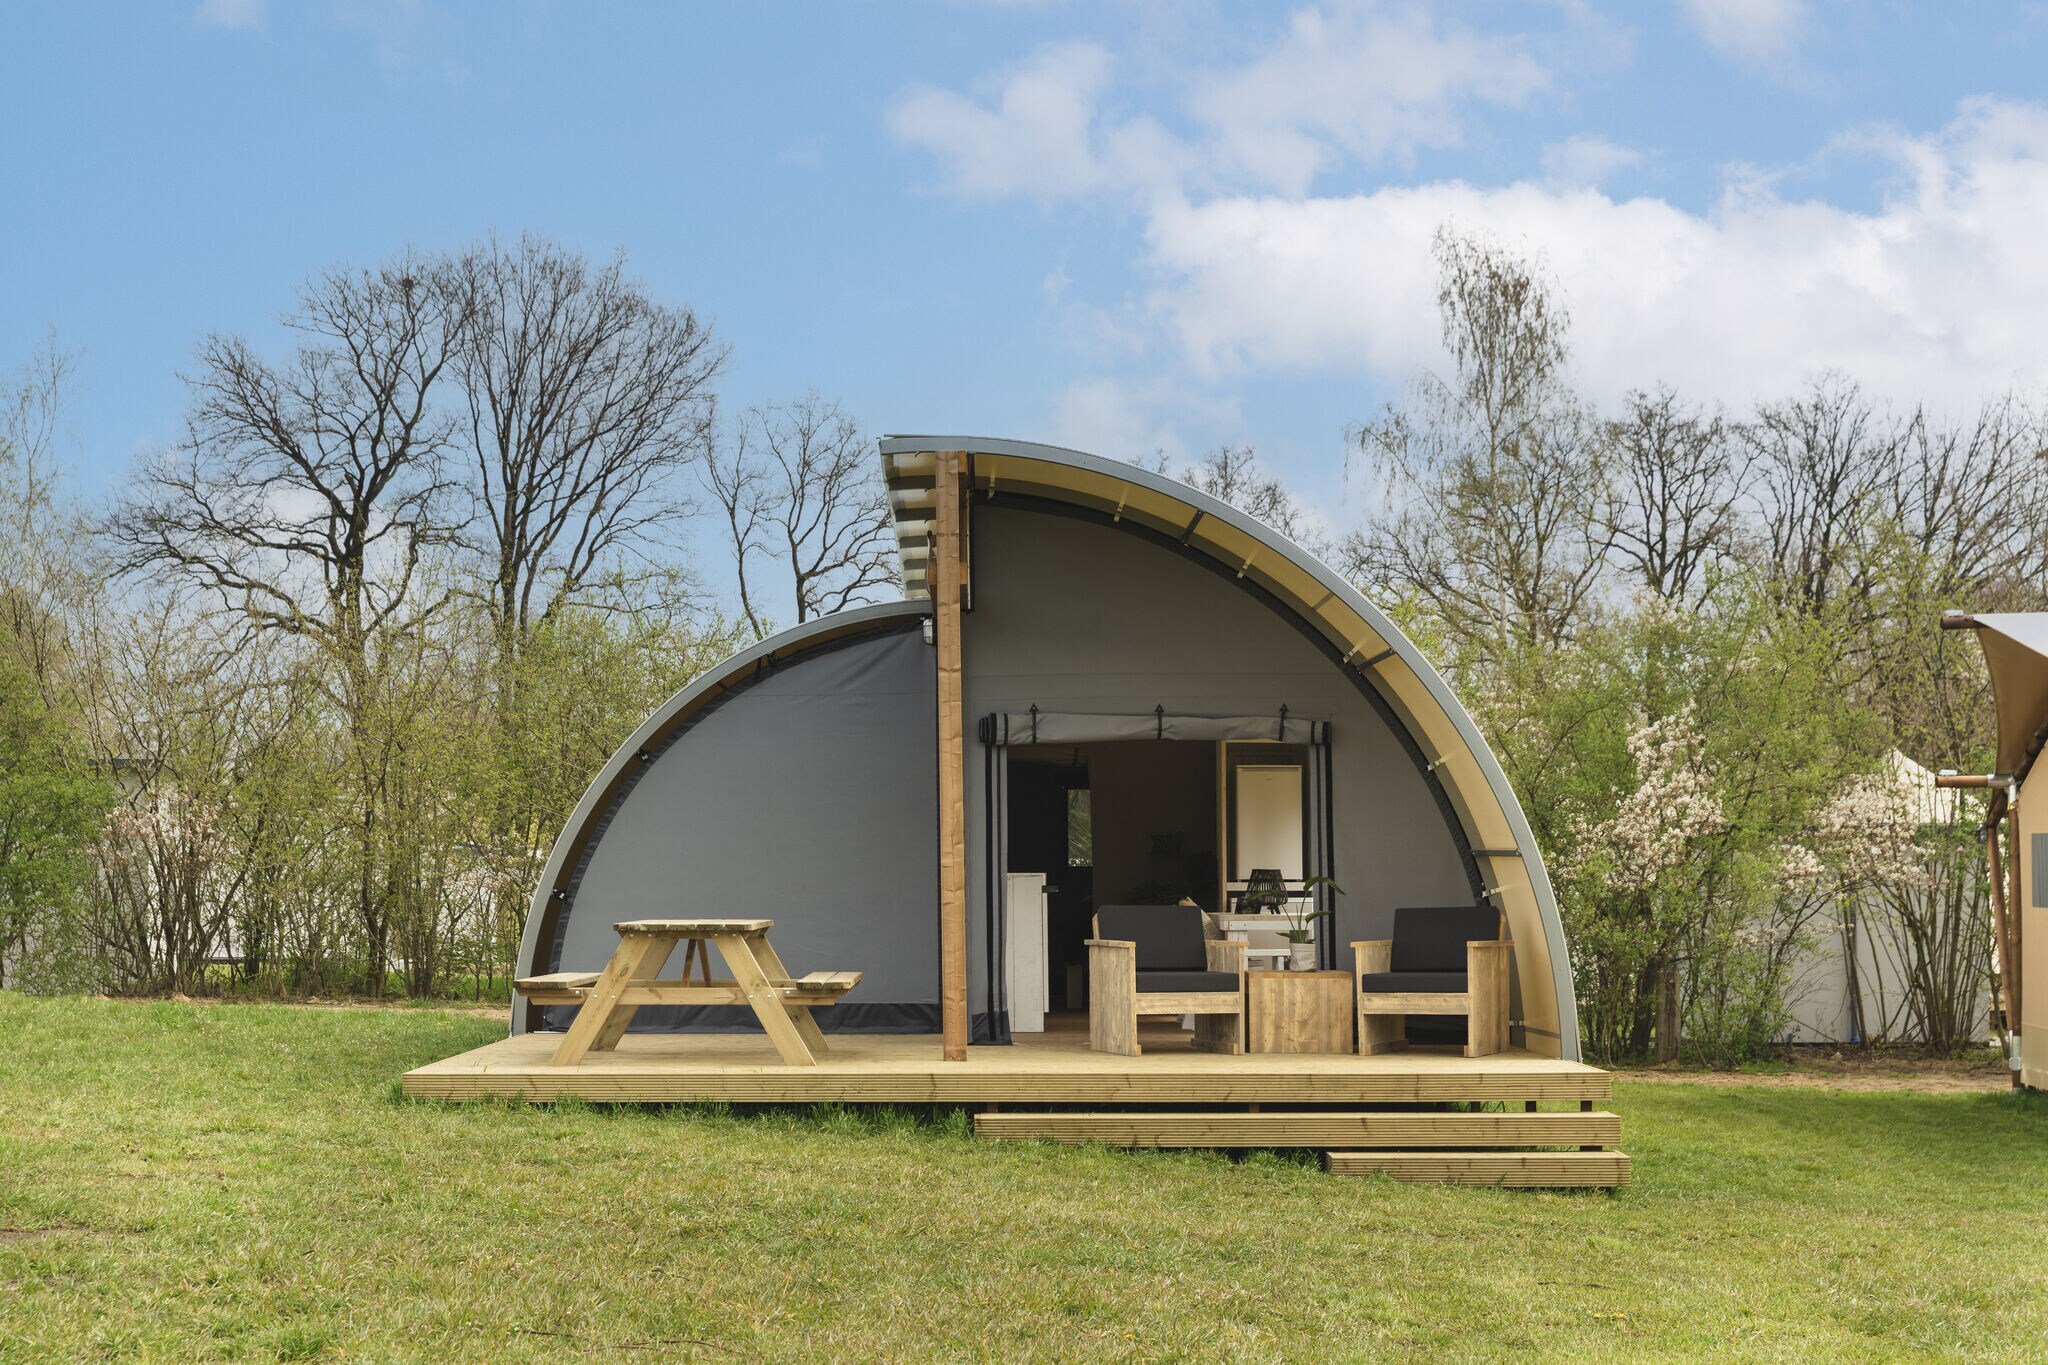 Glamping with private sanitary facilities